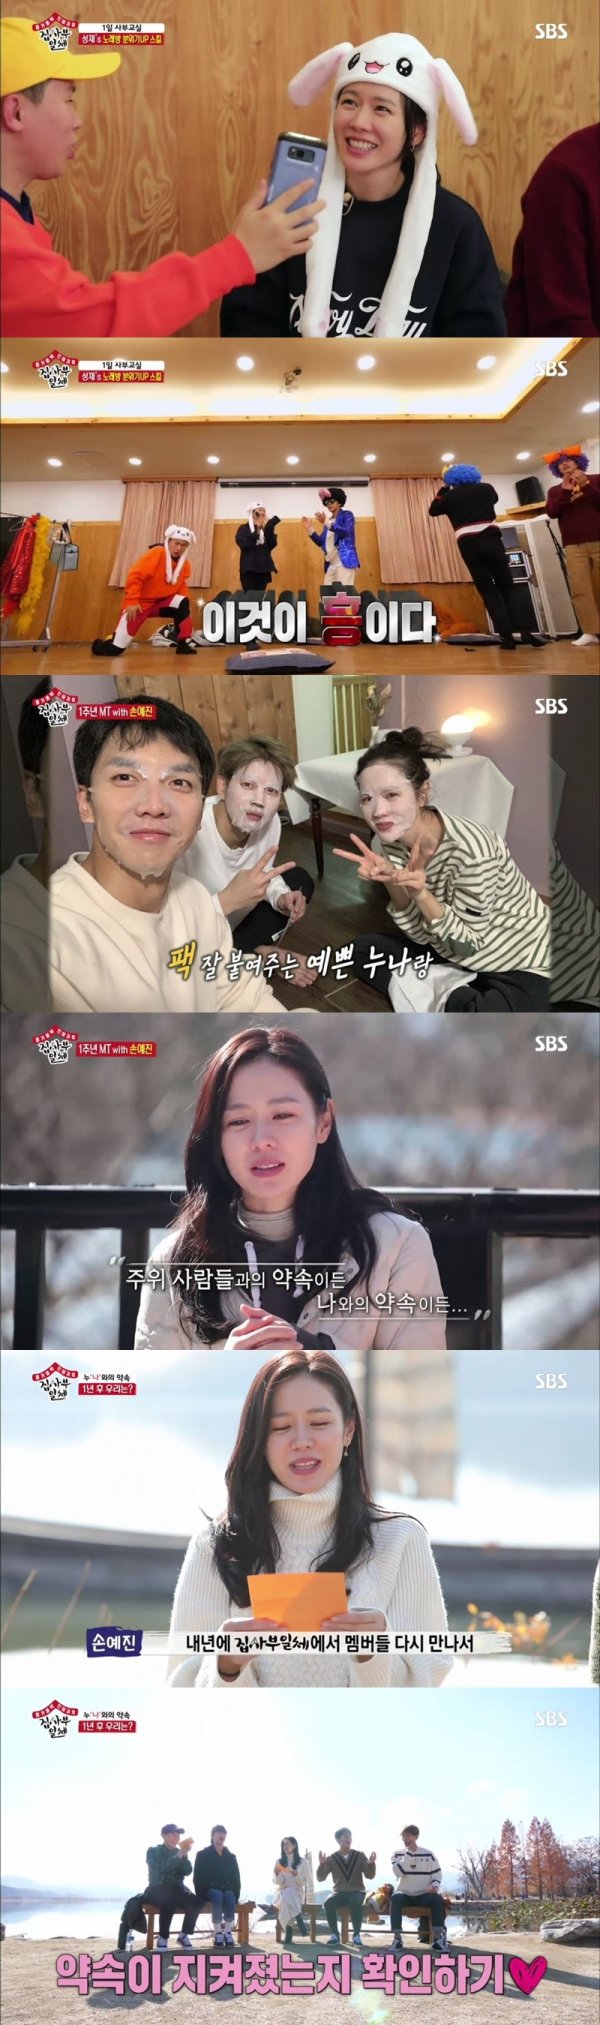 <p>Actress Son Ye-jin this ‘deacons be full’ members, with the 2019 reunion promised.</p><p>What, according to the 9th(Sunday) will be broadcast SBS ‘The Butler from itself’is a household audience 11. 1%, the Top 14. 2%(NCR, Part 2)to this day viewership high-run record this. This day ‘the Butler from itself’is 20 years old to 49 years young viewers target the 2049 target audience 5. 5%, KBS2 ‘Happy Sunday - Superman is back, 1 Night 2 days’ (4. 7%), MBC ‘Palace of the peoples husband’ (1. 4%)and the gap represents the same time zone 1 up eye-catching.</p><p>This day in the broadcast that Lee, Lee Seung-gi, Yang Se-hyeong, Yook Sungjae 1 year anniversary, the MT facilitator actor Son Ye-jin together with the special MT, enjoying the look was unveiled. Son Ye-jin is The Game this the The Game, dance the dance, perfect preparation and for reducing a reverse attraction with the members and the viewers captivated. A long time top keep the top of the actors meticulous planning and self-management, of human attraction and the ‘perfect one’may be.</p><p>First member and Son Ye-jin is a dinner you time to ‘ban The Game’the body into the pool. ‘The Game  Queen’ Son Ye-jin to break down for the members of the pincer was, but Son Ye-jin is the star of this fall-off was avoided. Eventually The Game in a losing Yook Sungjae and Lee Seung-gis dinner went. Lee Seung-gi and Yook Sungjae is Son Ye-jin this directly to the prepared ingredients into the barbecue to create and Son Ye-jin and MT is absurd. A real gift,said tingle you.</p><p>Barbecue to eat, and Lee Seung-gi who now work until 30 degree was, I heard,said the driver, release. Debut after 1 year in one, many two works by appeared for counting. Son Ye-jin this works end if it was easy to be hard scenario or seethe passion and work for the greedy.</p><p>Son Ye-jin this movie My wife got marriedBlue Dragon Film Festival Best Actress award, its a squirrel was at the time I was 27 years old. Lee Seung-gi, the 27 year old actress married her role was not easy the decision seems to have beencalled, Son Ye-jin is 24 years old in an affair with her, the 25-run divorce her I had to smoke,he said. Yook Sungjae with tremendous challenge.amazing, Son Ye-jin is now you see it a tremendous challenge to think didnt like. The stranger within a smoke about this thing how not to? Want to is fear, afraid was not the same.</p><p>This day, the members of Son Ye-jin in this film my head of the eraserthe scenes of a parody. Jung Woo sung role in this or if you drink with me back there?La asked when Son Ye-jin this drink to be successful. The first runner spiral Lee is cool this or if you drink with me back there.he said, but Son Ye-jin I dont want to,he said to laughter. Lee Seung-gi finish cool Flash failure with Yang Se-hyeong, this stepped forward.</p><p>This day in the broadcast Son Ye-jin is a member of the three do share(三人行必有我師)from three people with of them necessarily in one person is the master of that story,and 1 use some of the to be proposed. Son Ye-jins ‘love’as Lee Seung-gi, Lee, Yang Se-hyeong, Yook Sungjae is a rising type present, each one with their own theme, A 10-minute lecture period.</p><p>Lee is the argument for using the speed mental arithmetic, Yang Se-hyeong is the horse into the River, Lee Seung-gi is 25 years old by chat, Yook Sungjae is the karaoke atmosphere in the bootstrap of the river. Son Ye-jin of the exciting karaoke practice in the explosion. Hot for expensive items Bunny ears hat, Son Ye-jin is a member with them for their ‘bus in’and the gorgeous stage. The frenzy of the dance partyto your shooting. Son Ye-jin of reversal of ‘excited’members of the original excitement and playing with sister, teach drill there was no need,said Marvel.</p><p>Pack and whiter the light, finishing the day for members. The next morning, Son Ye-jin is members toast to directly and together the two walk out on her. Son Ye-jin is a member them, I promise. And, with the promise of a man and the promise of the all importanta few days promise to do one next year kept the show will be fun,he said.</p><p>Yook Sungjae solo album challenge, Lee Seung-gi is a week of desert travel, Yang Se-hyeong is the other, Lee is playing the pianogoals for next year as promised. All of me ‘and the promise of’said back finally Son Ye-jin is next year in the house from itself in themembers meet again in the promise was kept to verify that thepromise walk and 2019 material nature promised. The members all cheered for among Yook Sungjae 1 year why go on looks,revealed that Son Ye-jin on the bread I am.</p><p>Especially this day, Son Ye-jin the members and of the conditions, the scene, per minute viewership of 14. 2% ‘best 1 minute’.</p><p>Photo by SBS ‘The Butler from itself’</p>